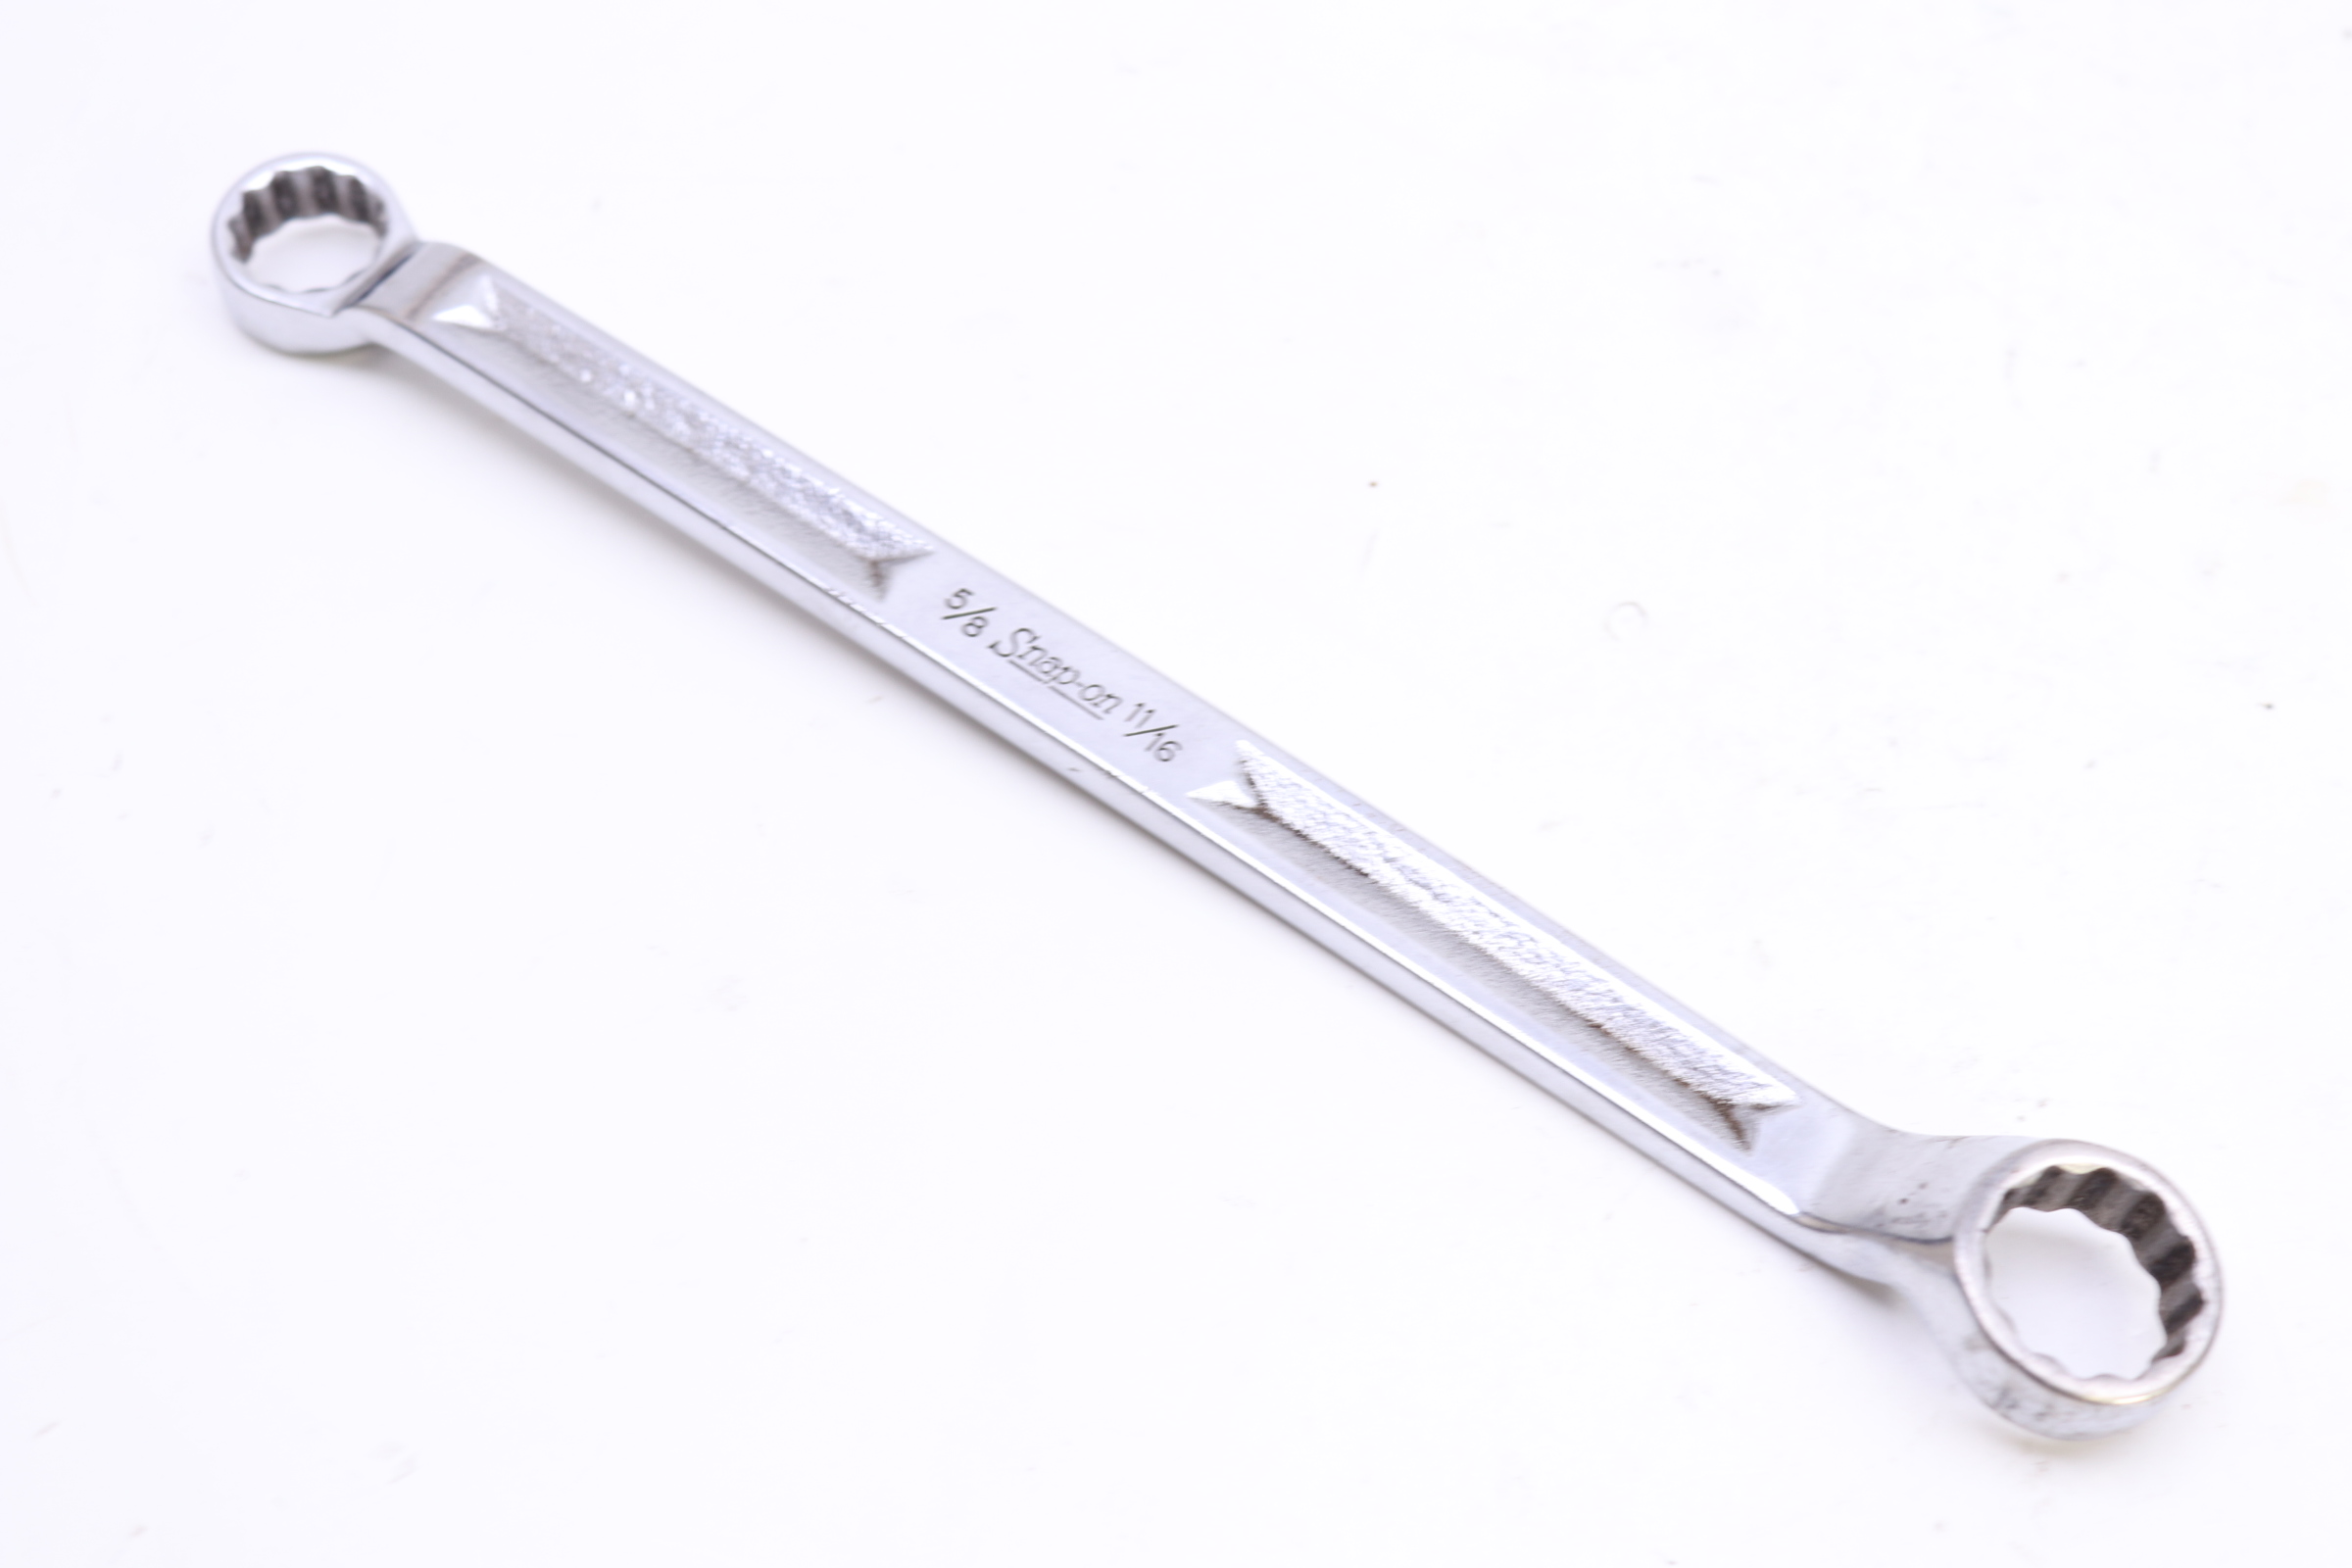 Snap-on Tools NEW OEXLET Chrome Letter Mail Opener 12-Point Wrench